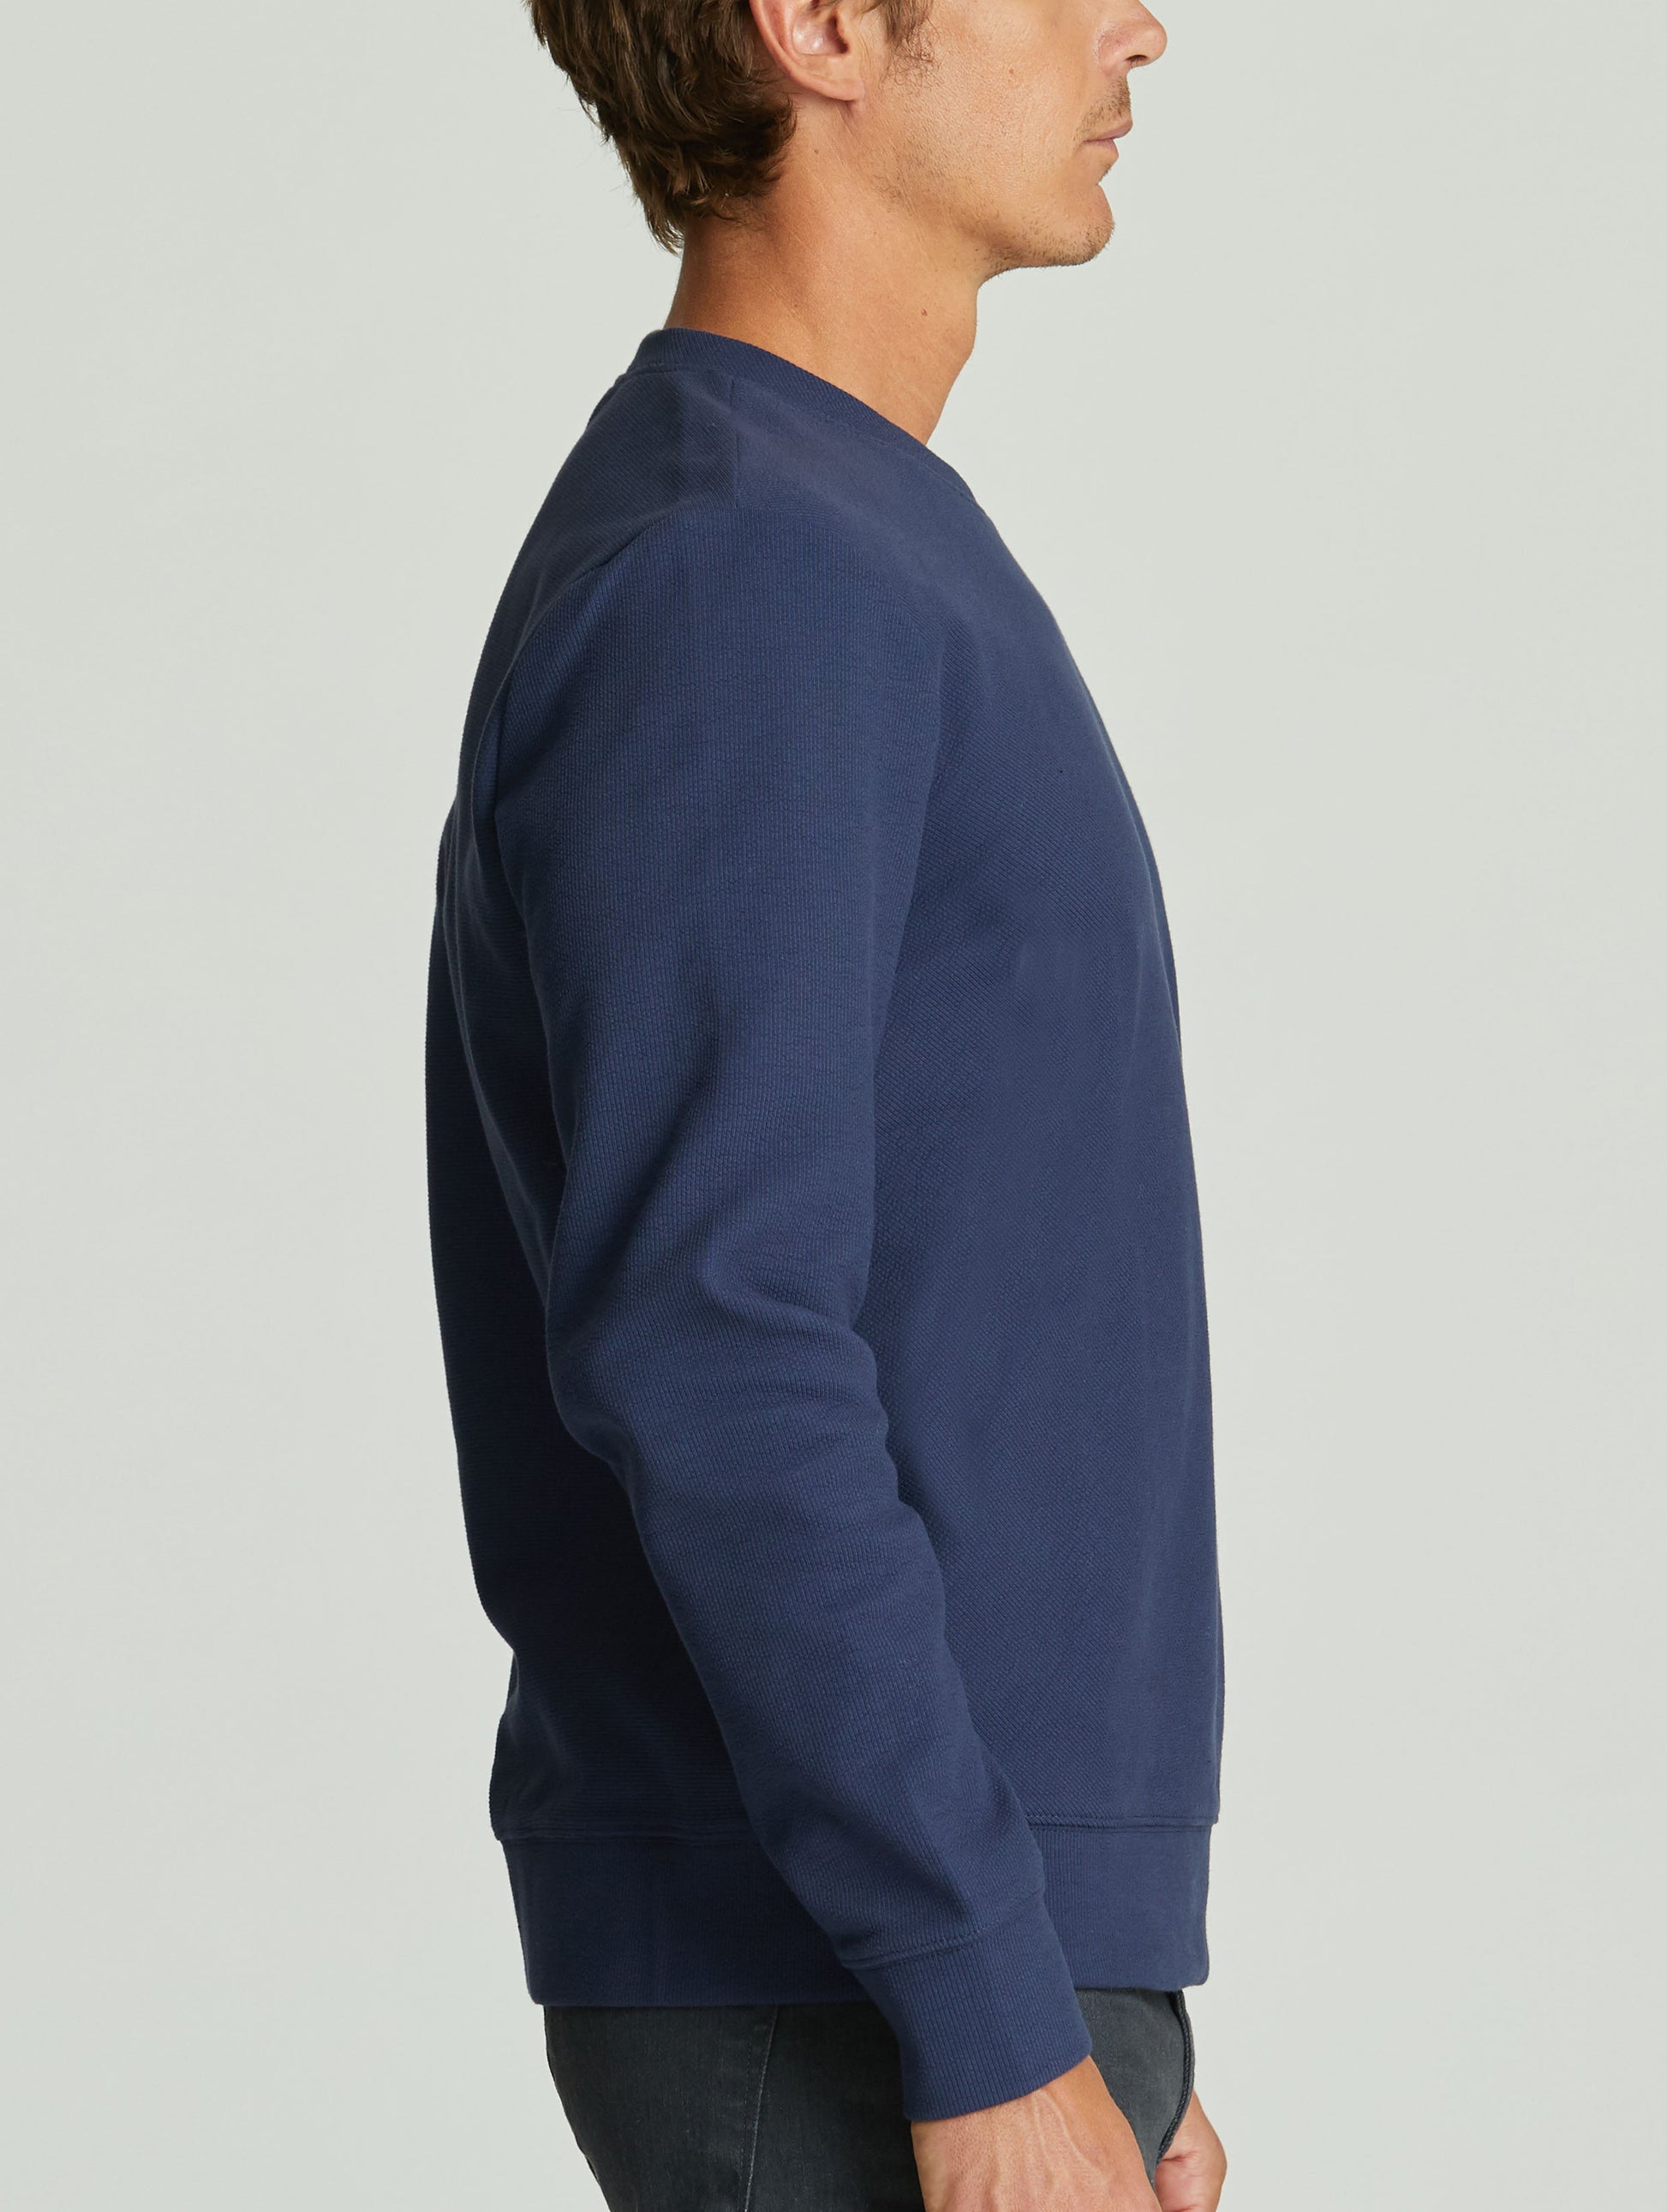 man wearing blue pullover